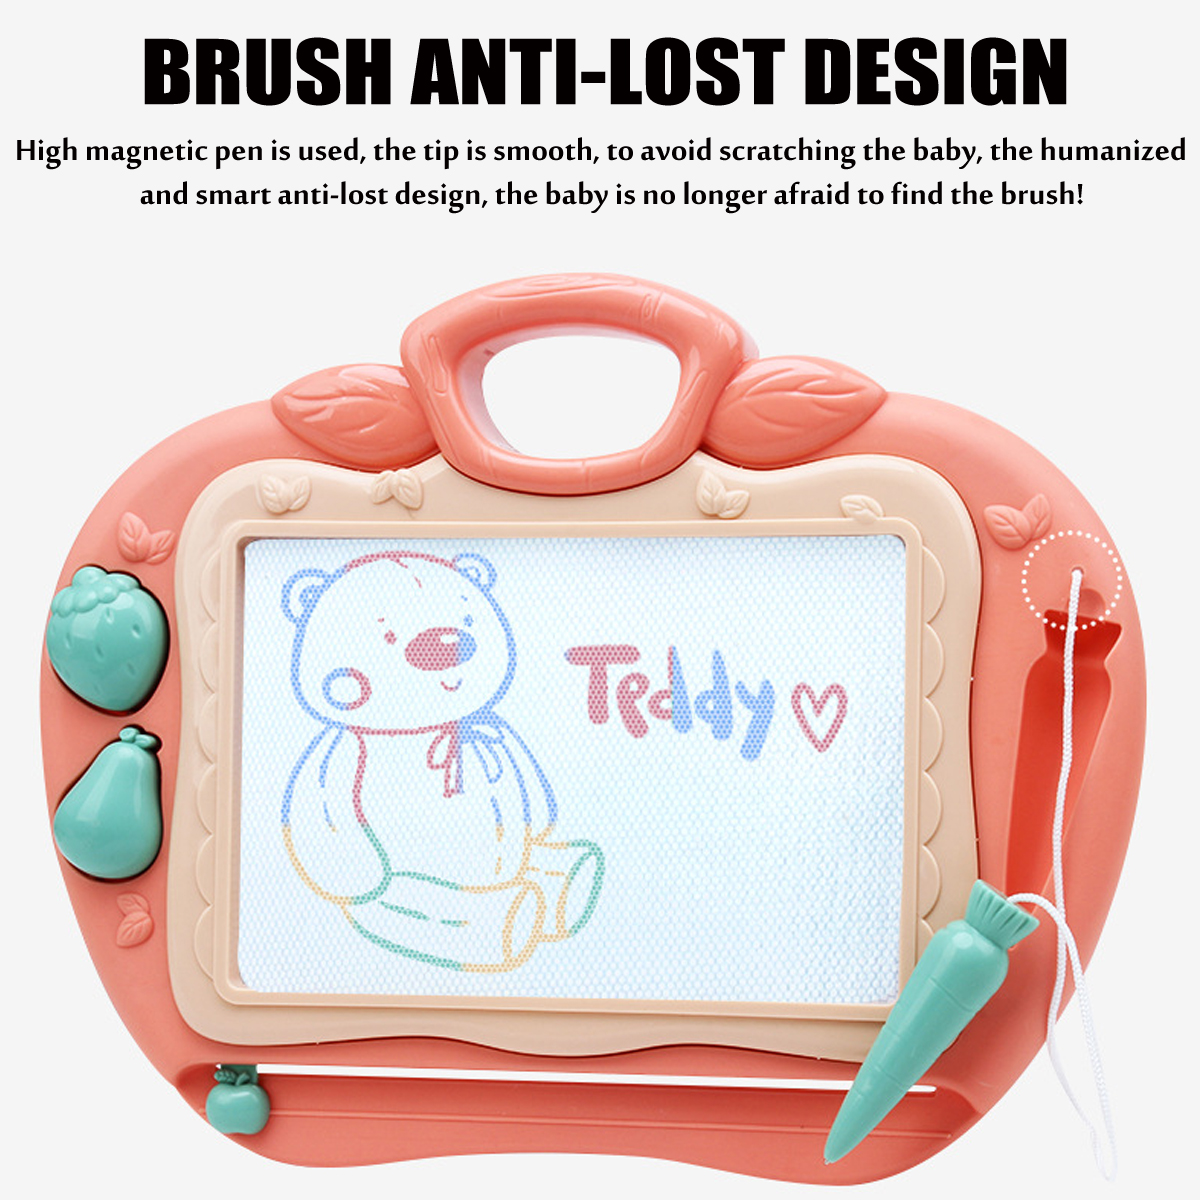 Magnetic-Drawing-Board-Color-Sketch-Pad-Kids-Multi-functional-Writing-Table-Graffiti-Painting-Toys-f-1739356-5